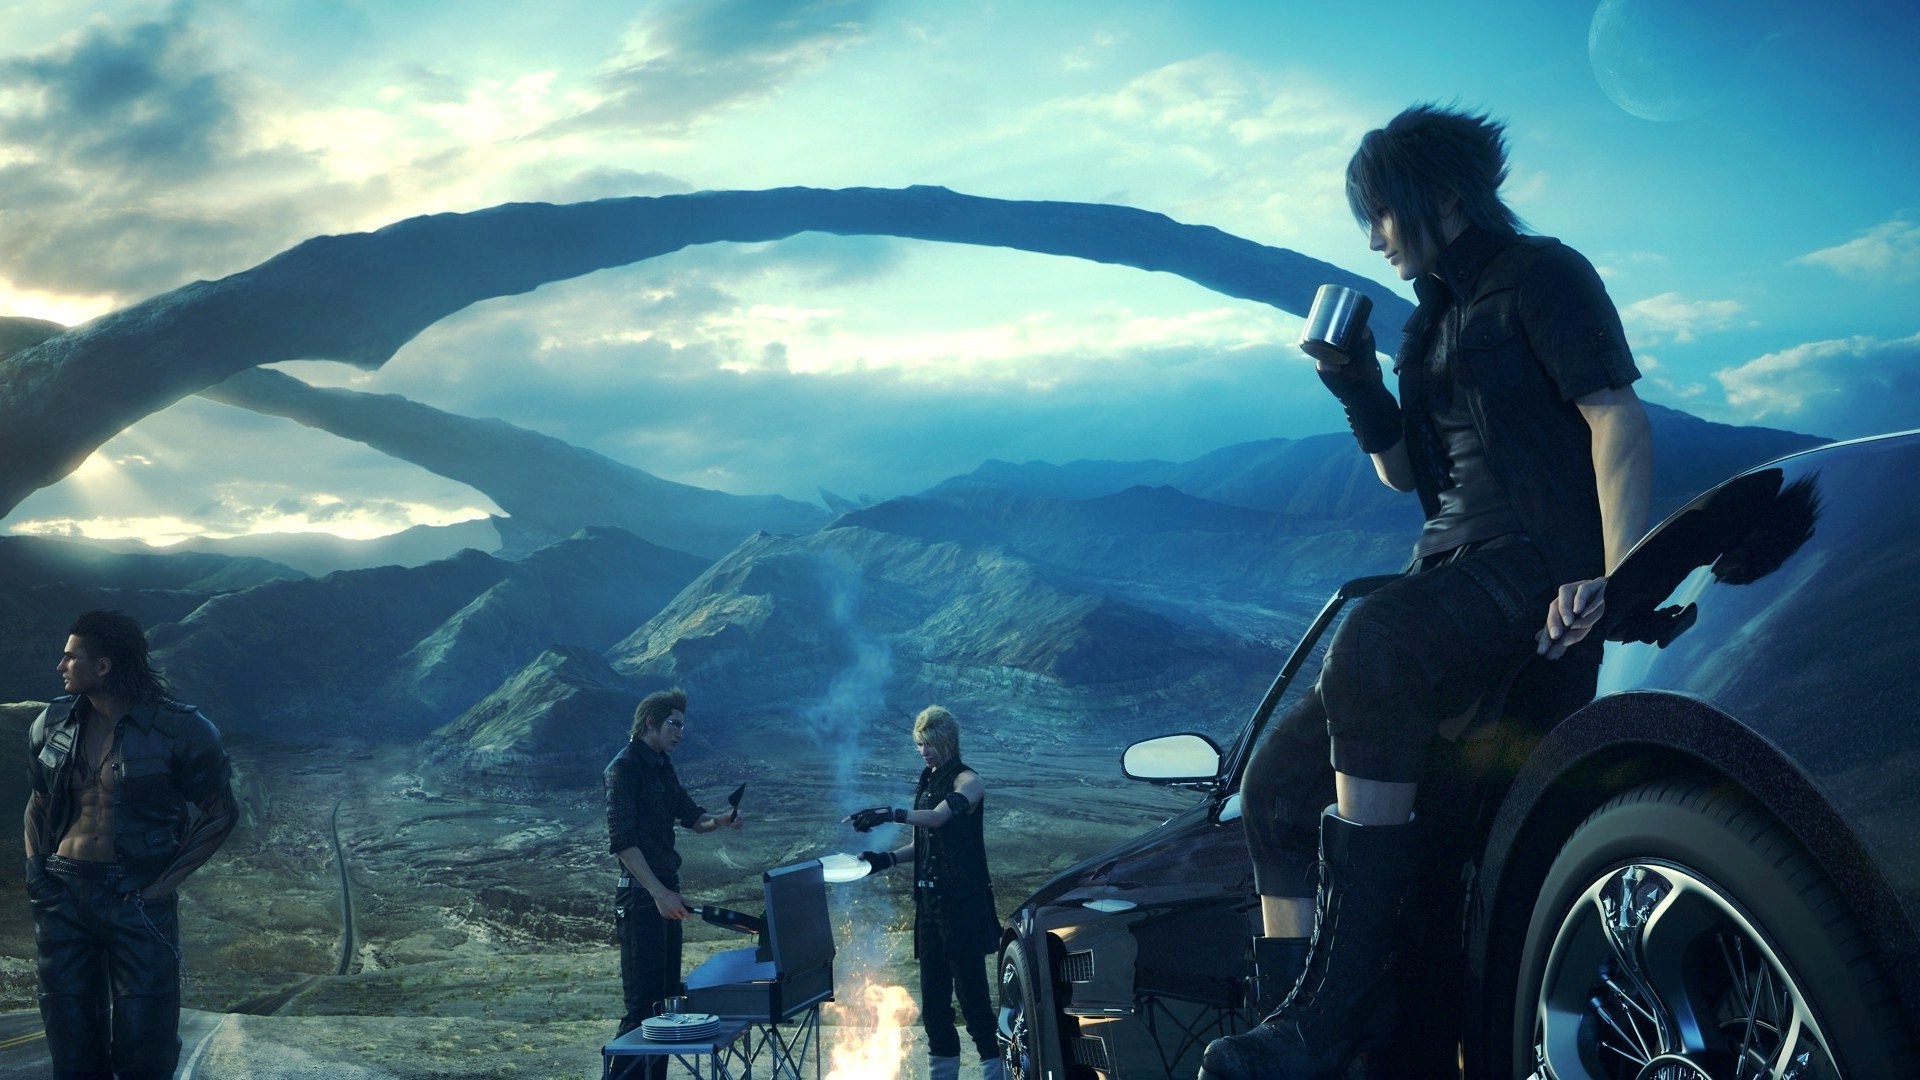 “Final Fantasy XV” Is Playable from Start to Finish - My We Have Come A Long Way